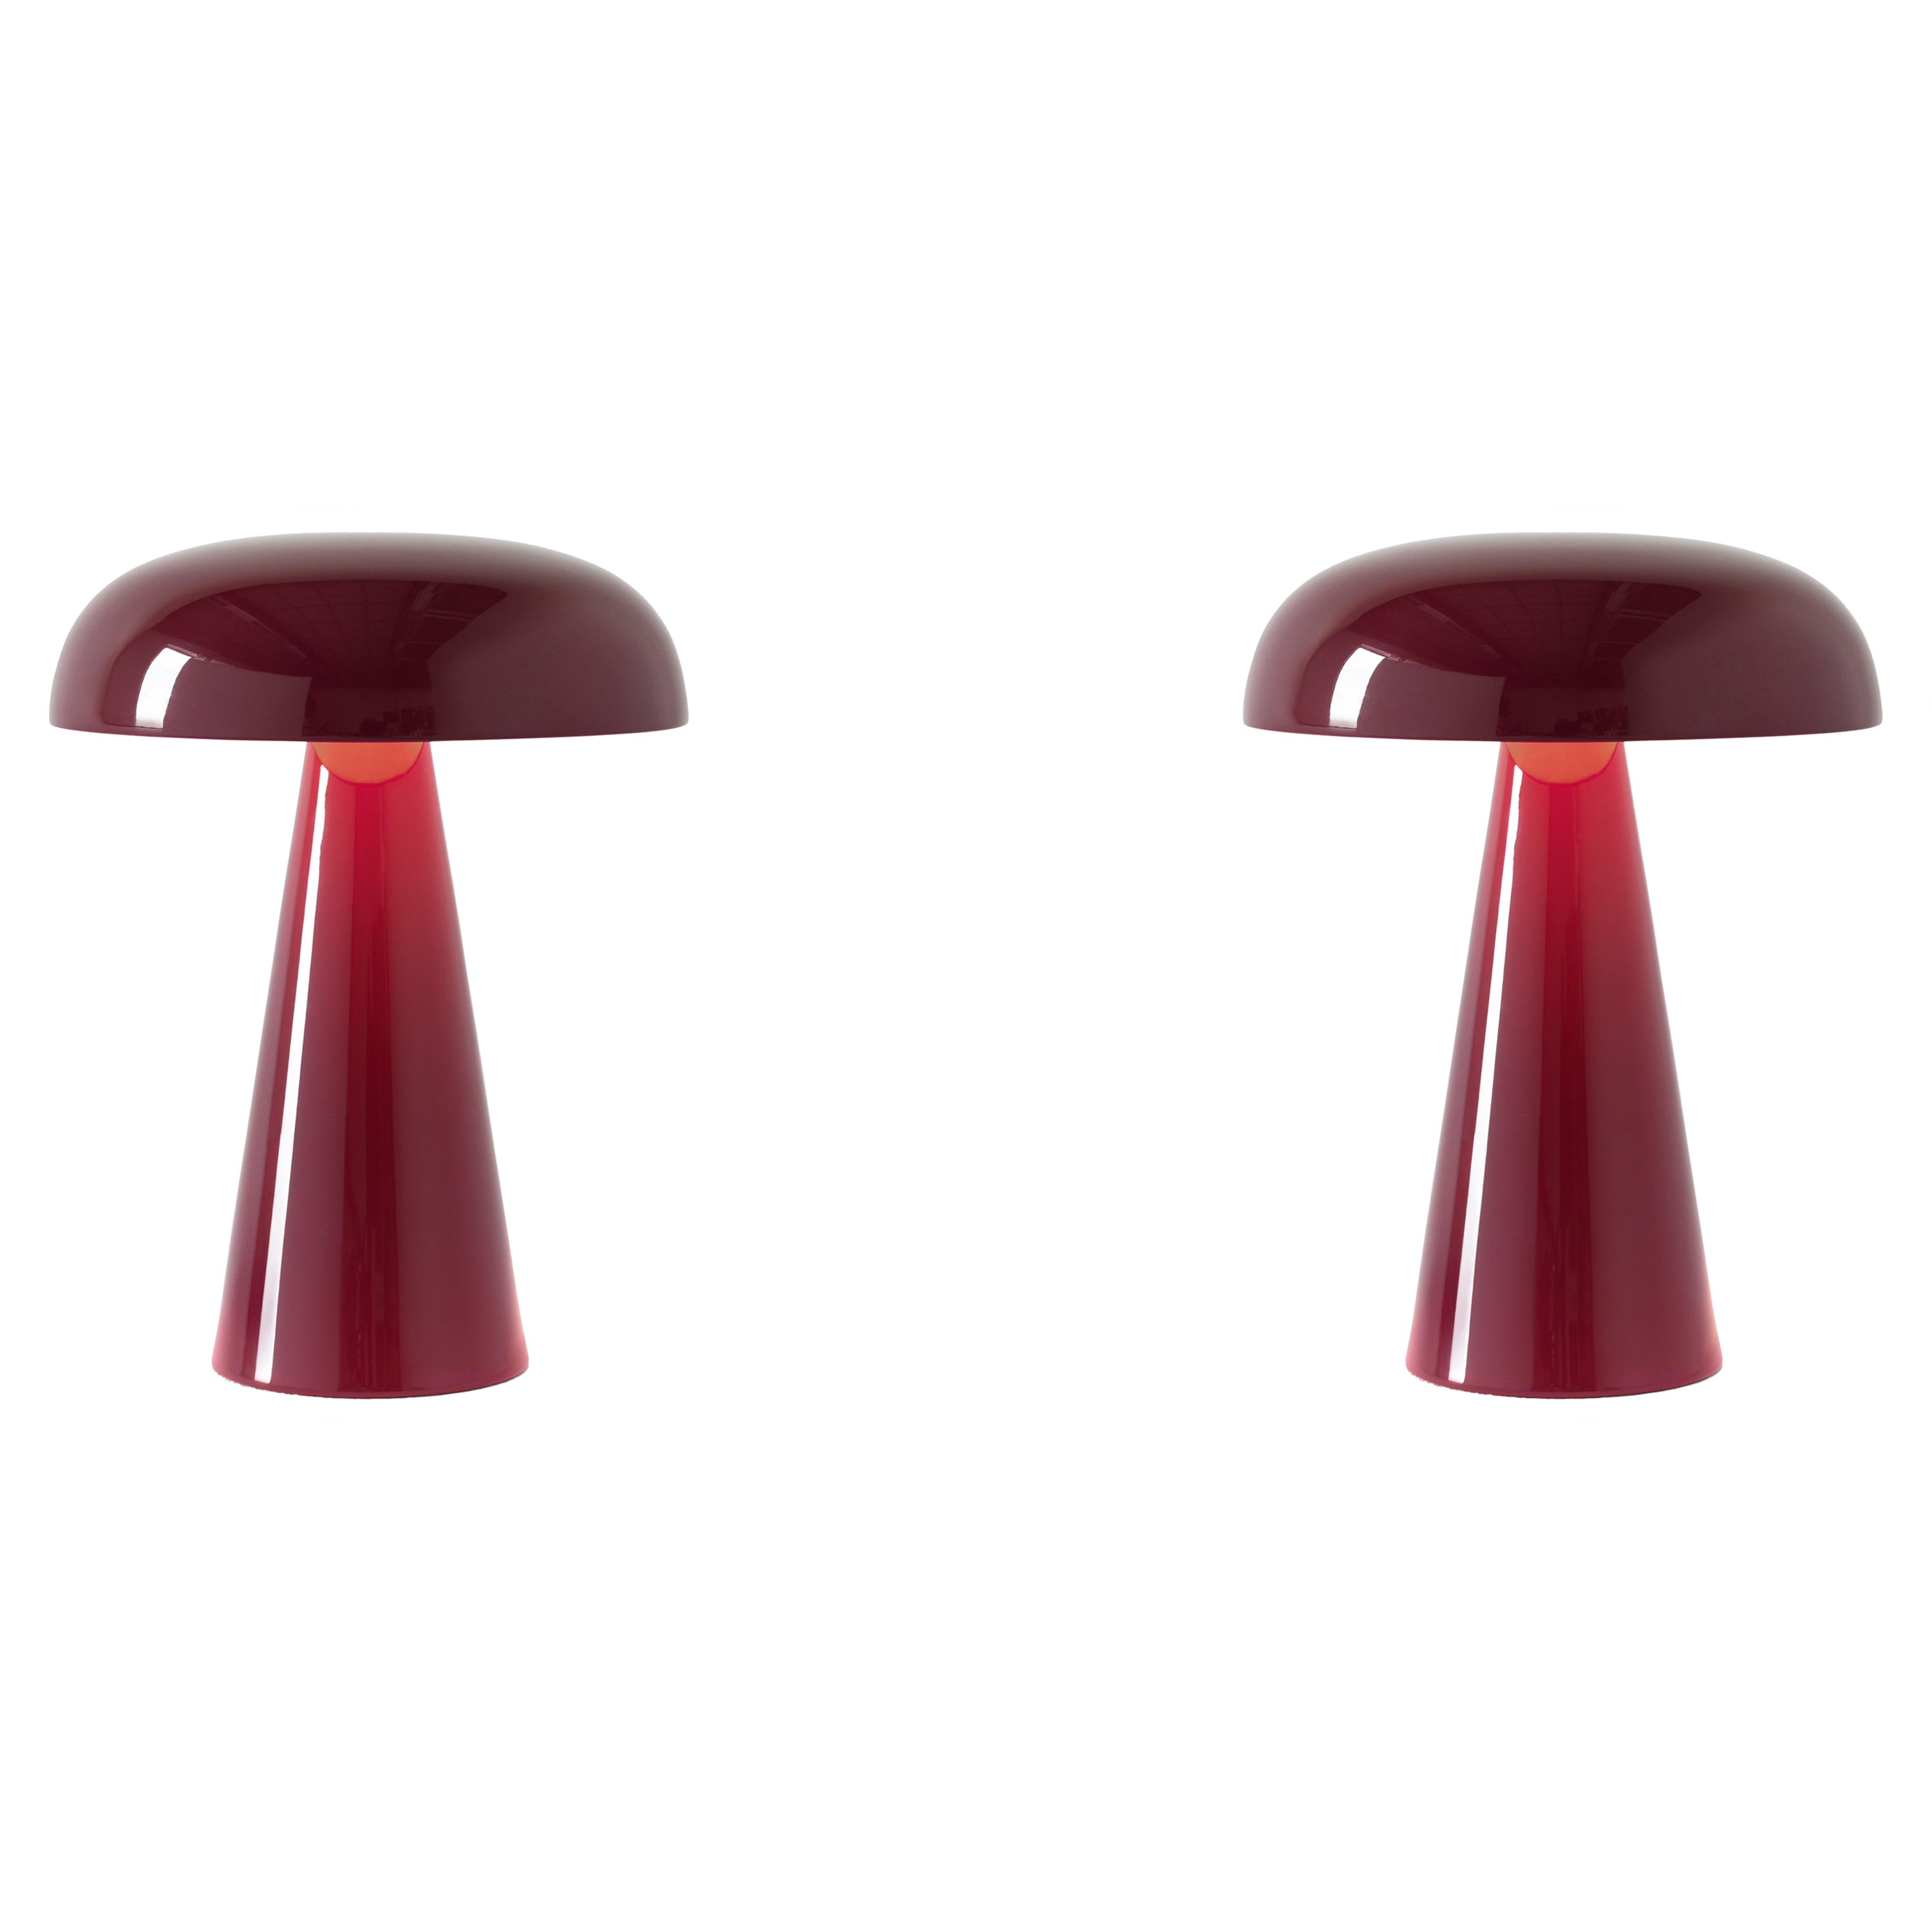 Pair of Red Brown ComoSC53 Portable Table Lamp by Space Copenhagen for&Tradition